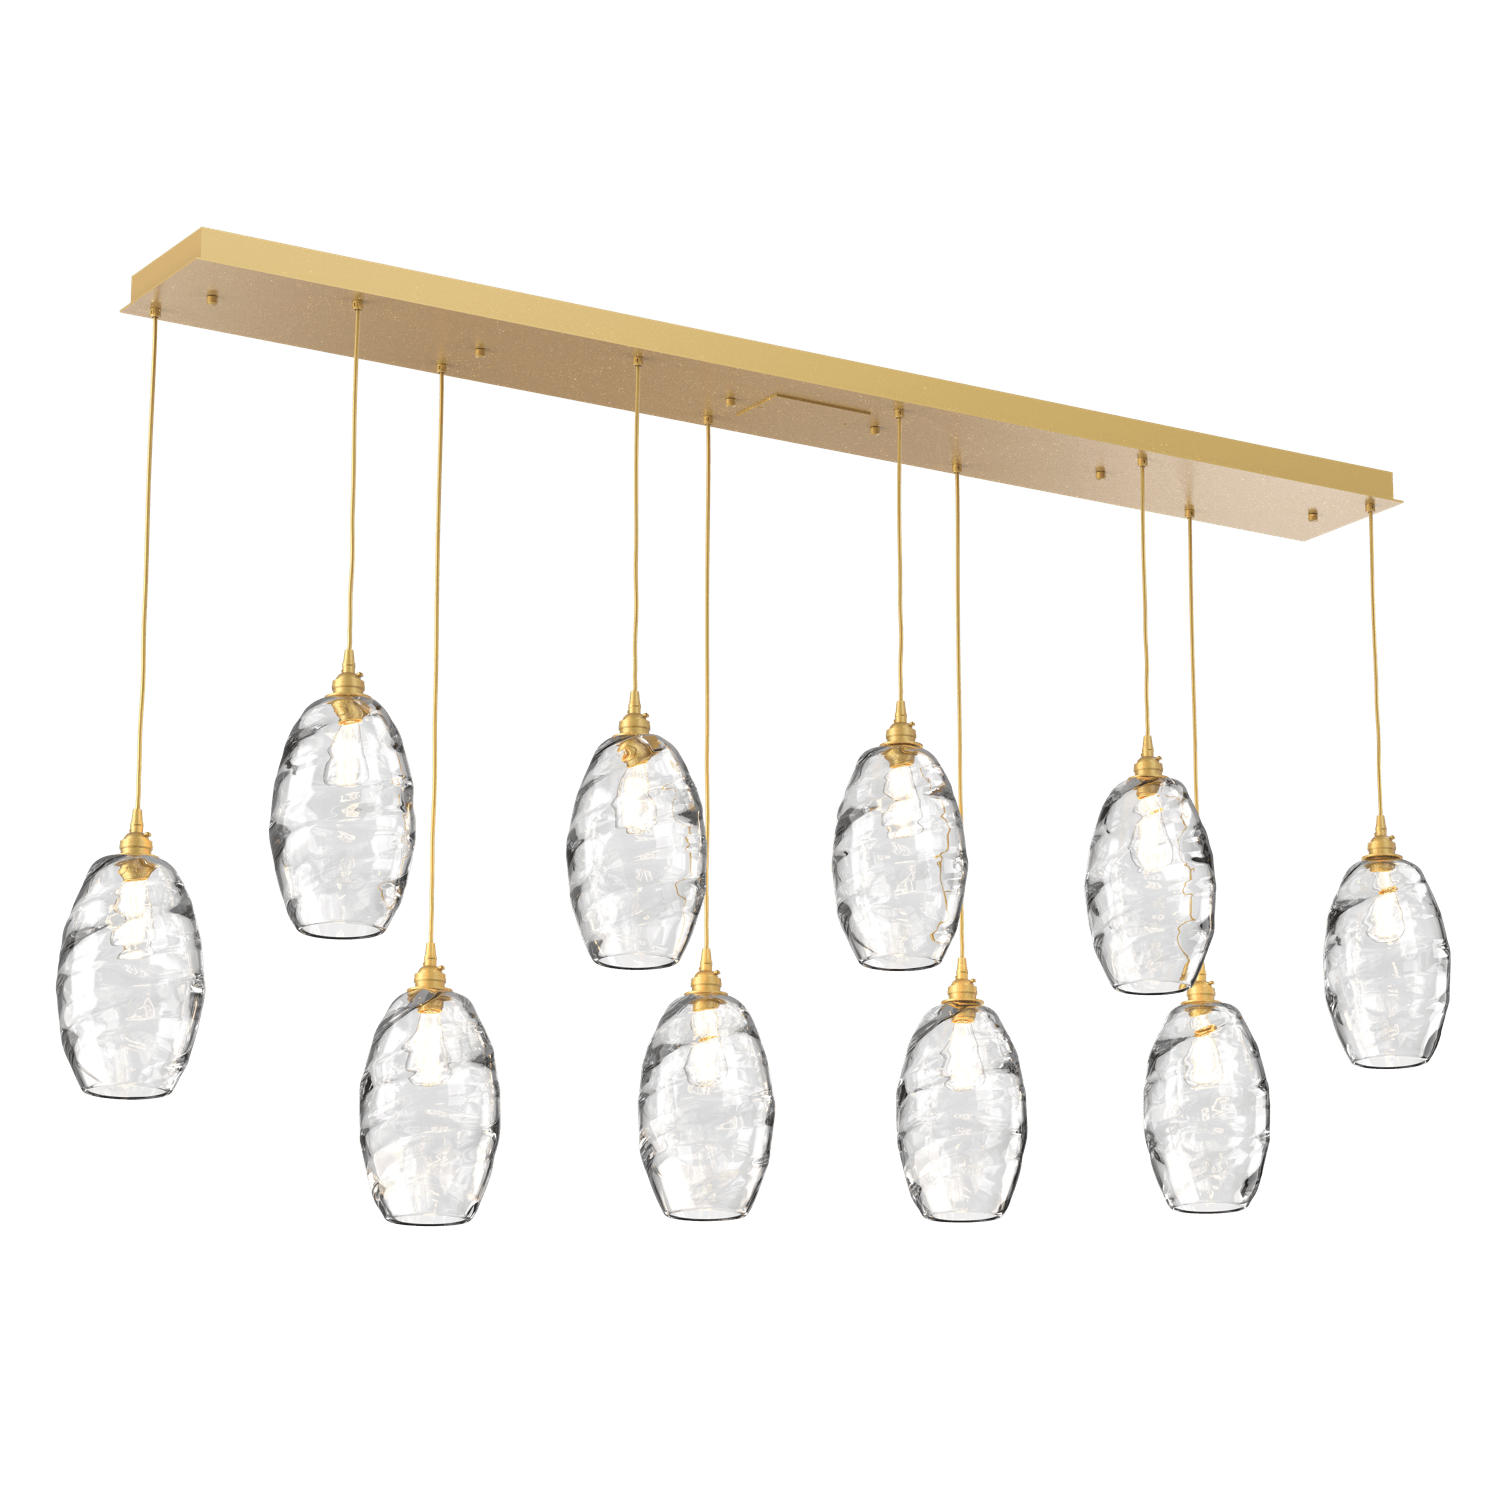 PLB0035-10-GB-OC-Hammerton-Studio-Optic-Blown-Glass-Elisse-10-light-linear-pendant-chandelier-with-gilded-brass-finish-and-optic-clear-blown-glass-shades-and-incandescent-lamping